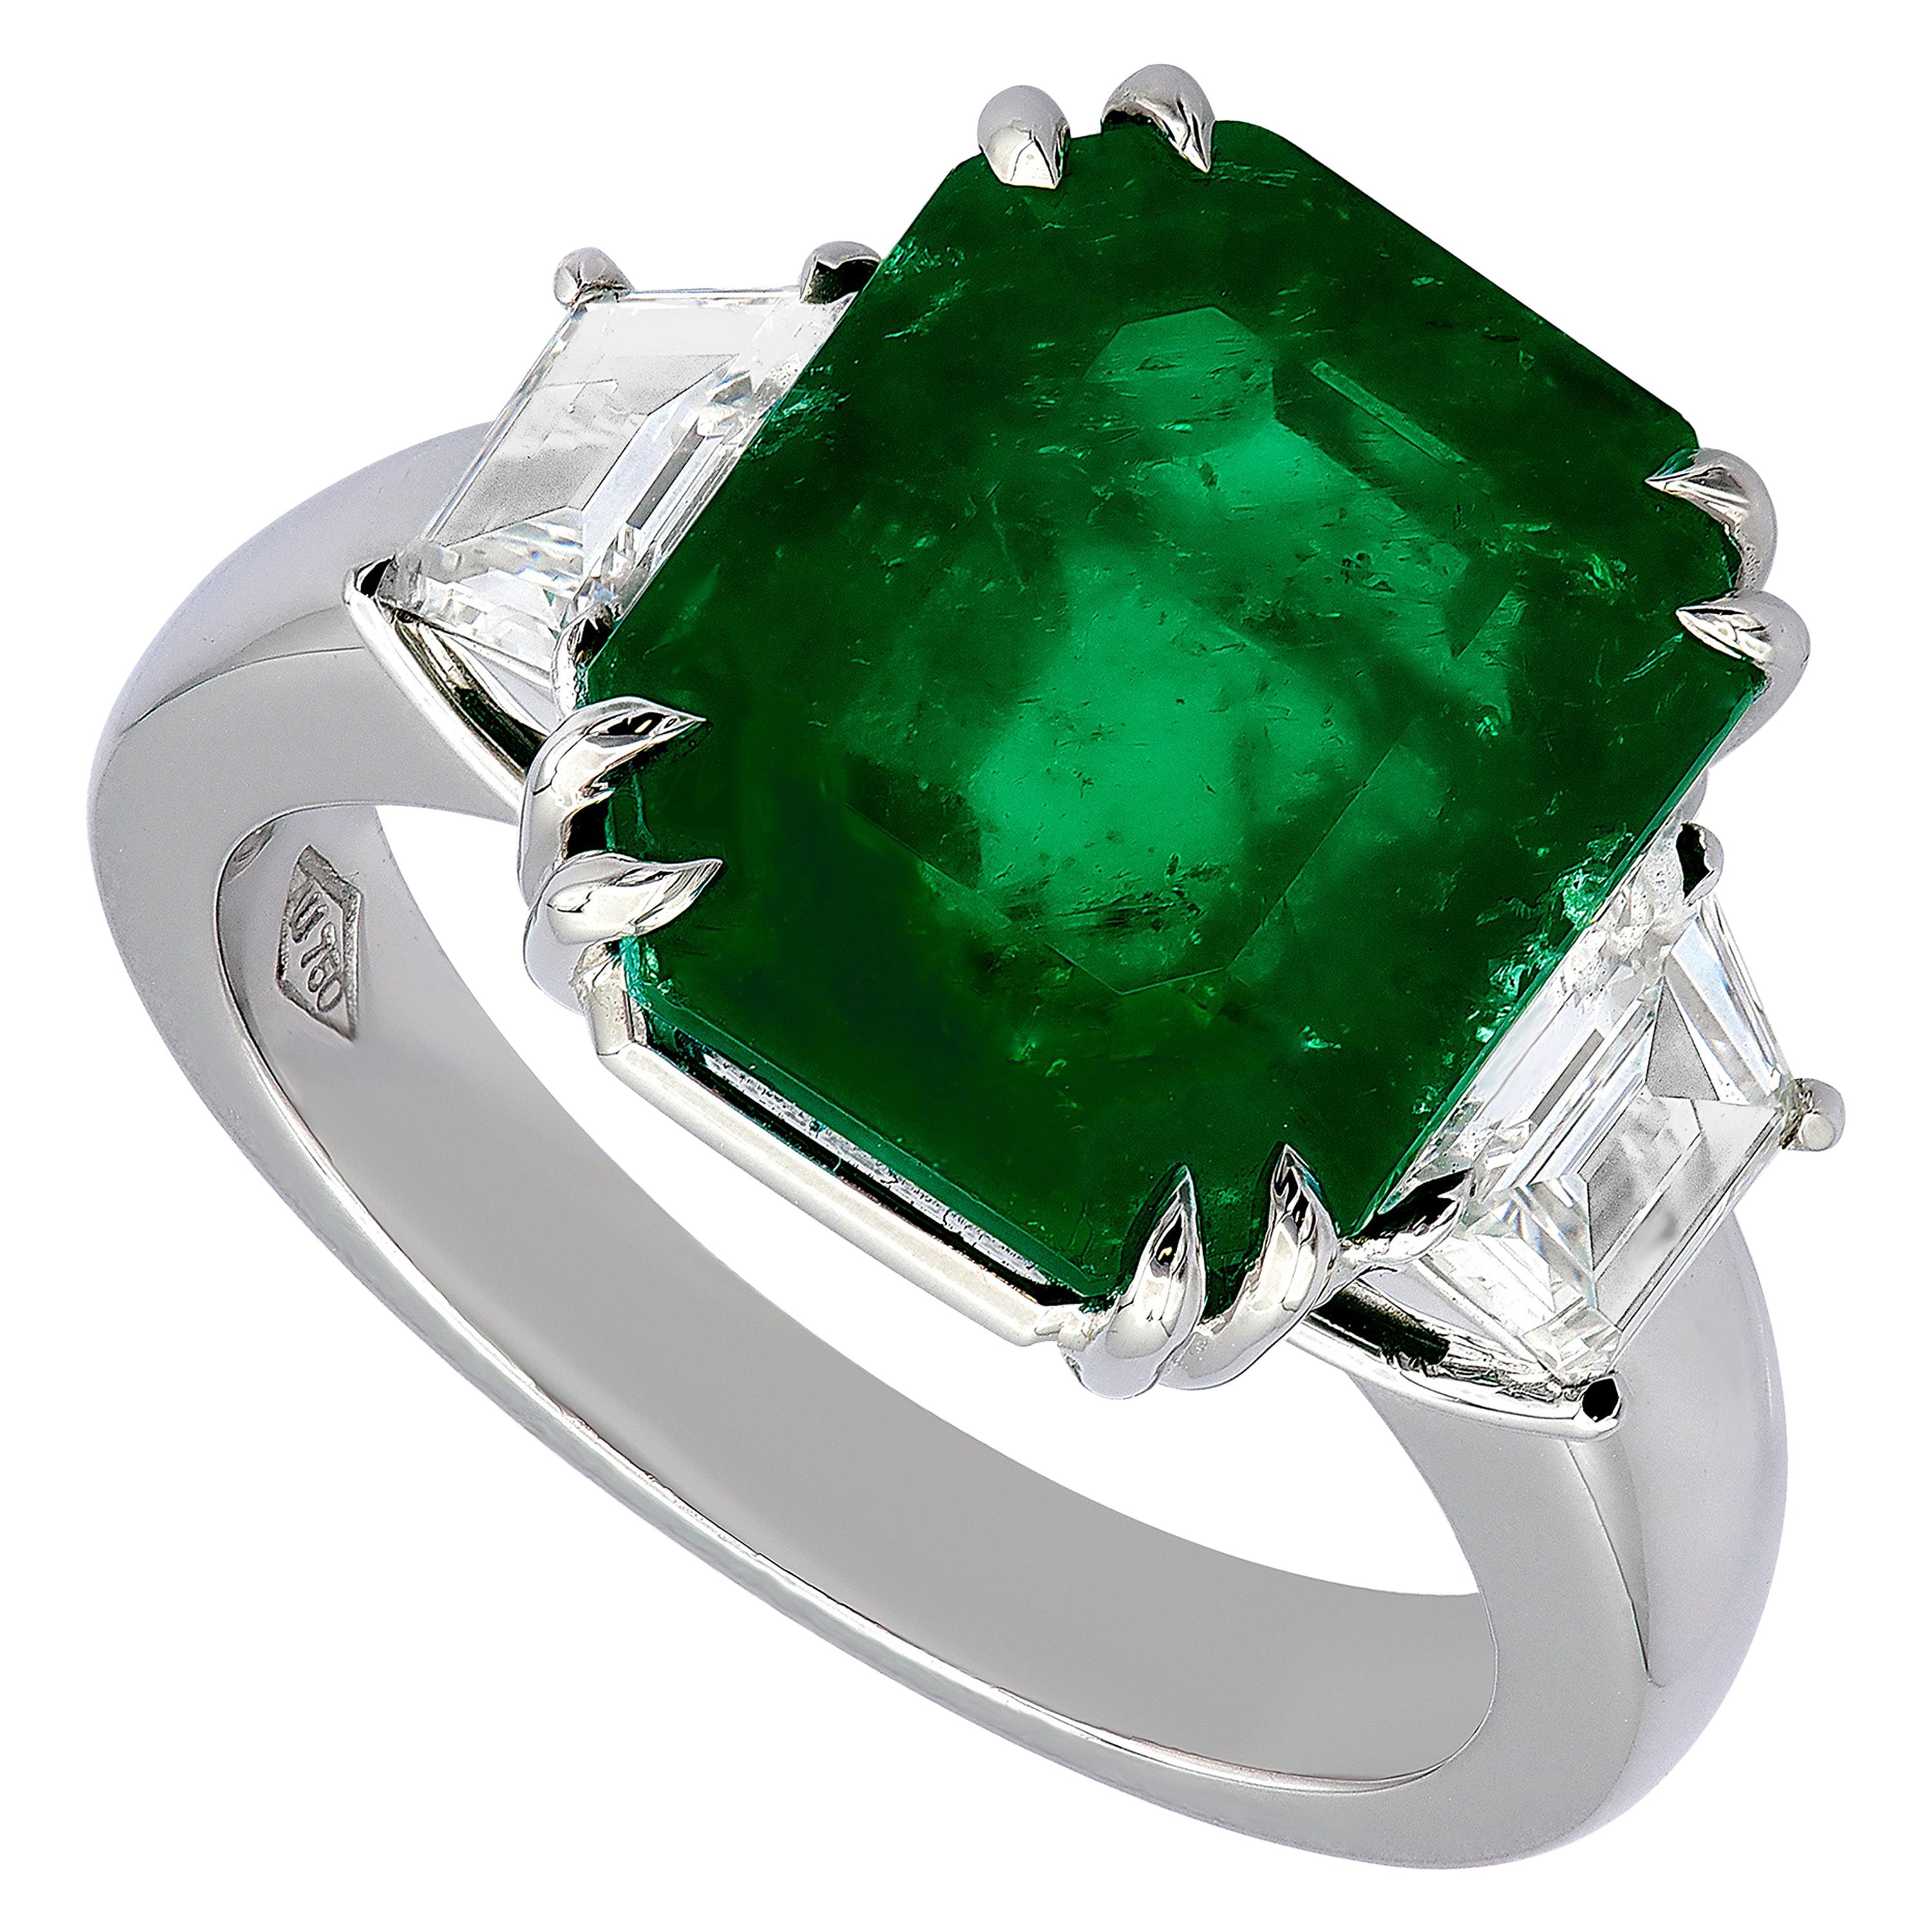 18kt white gold Cocktail Ring 8.267ct Emerald, 2.84ct Diamond,  SSEF Certified